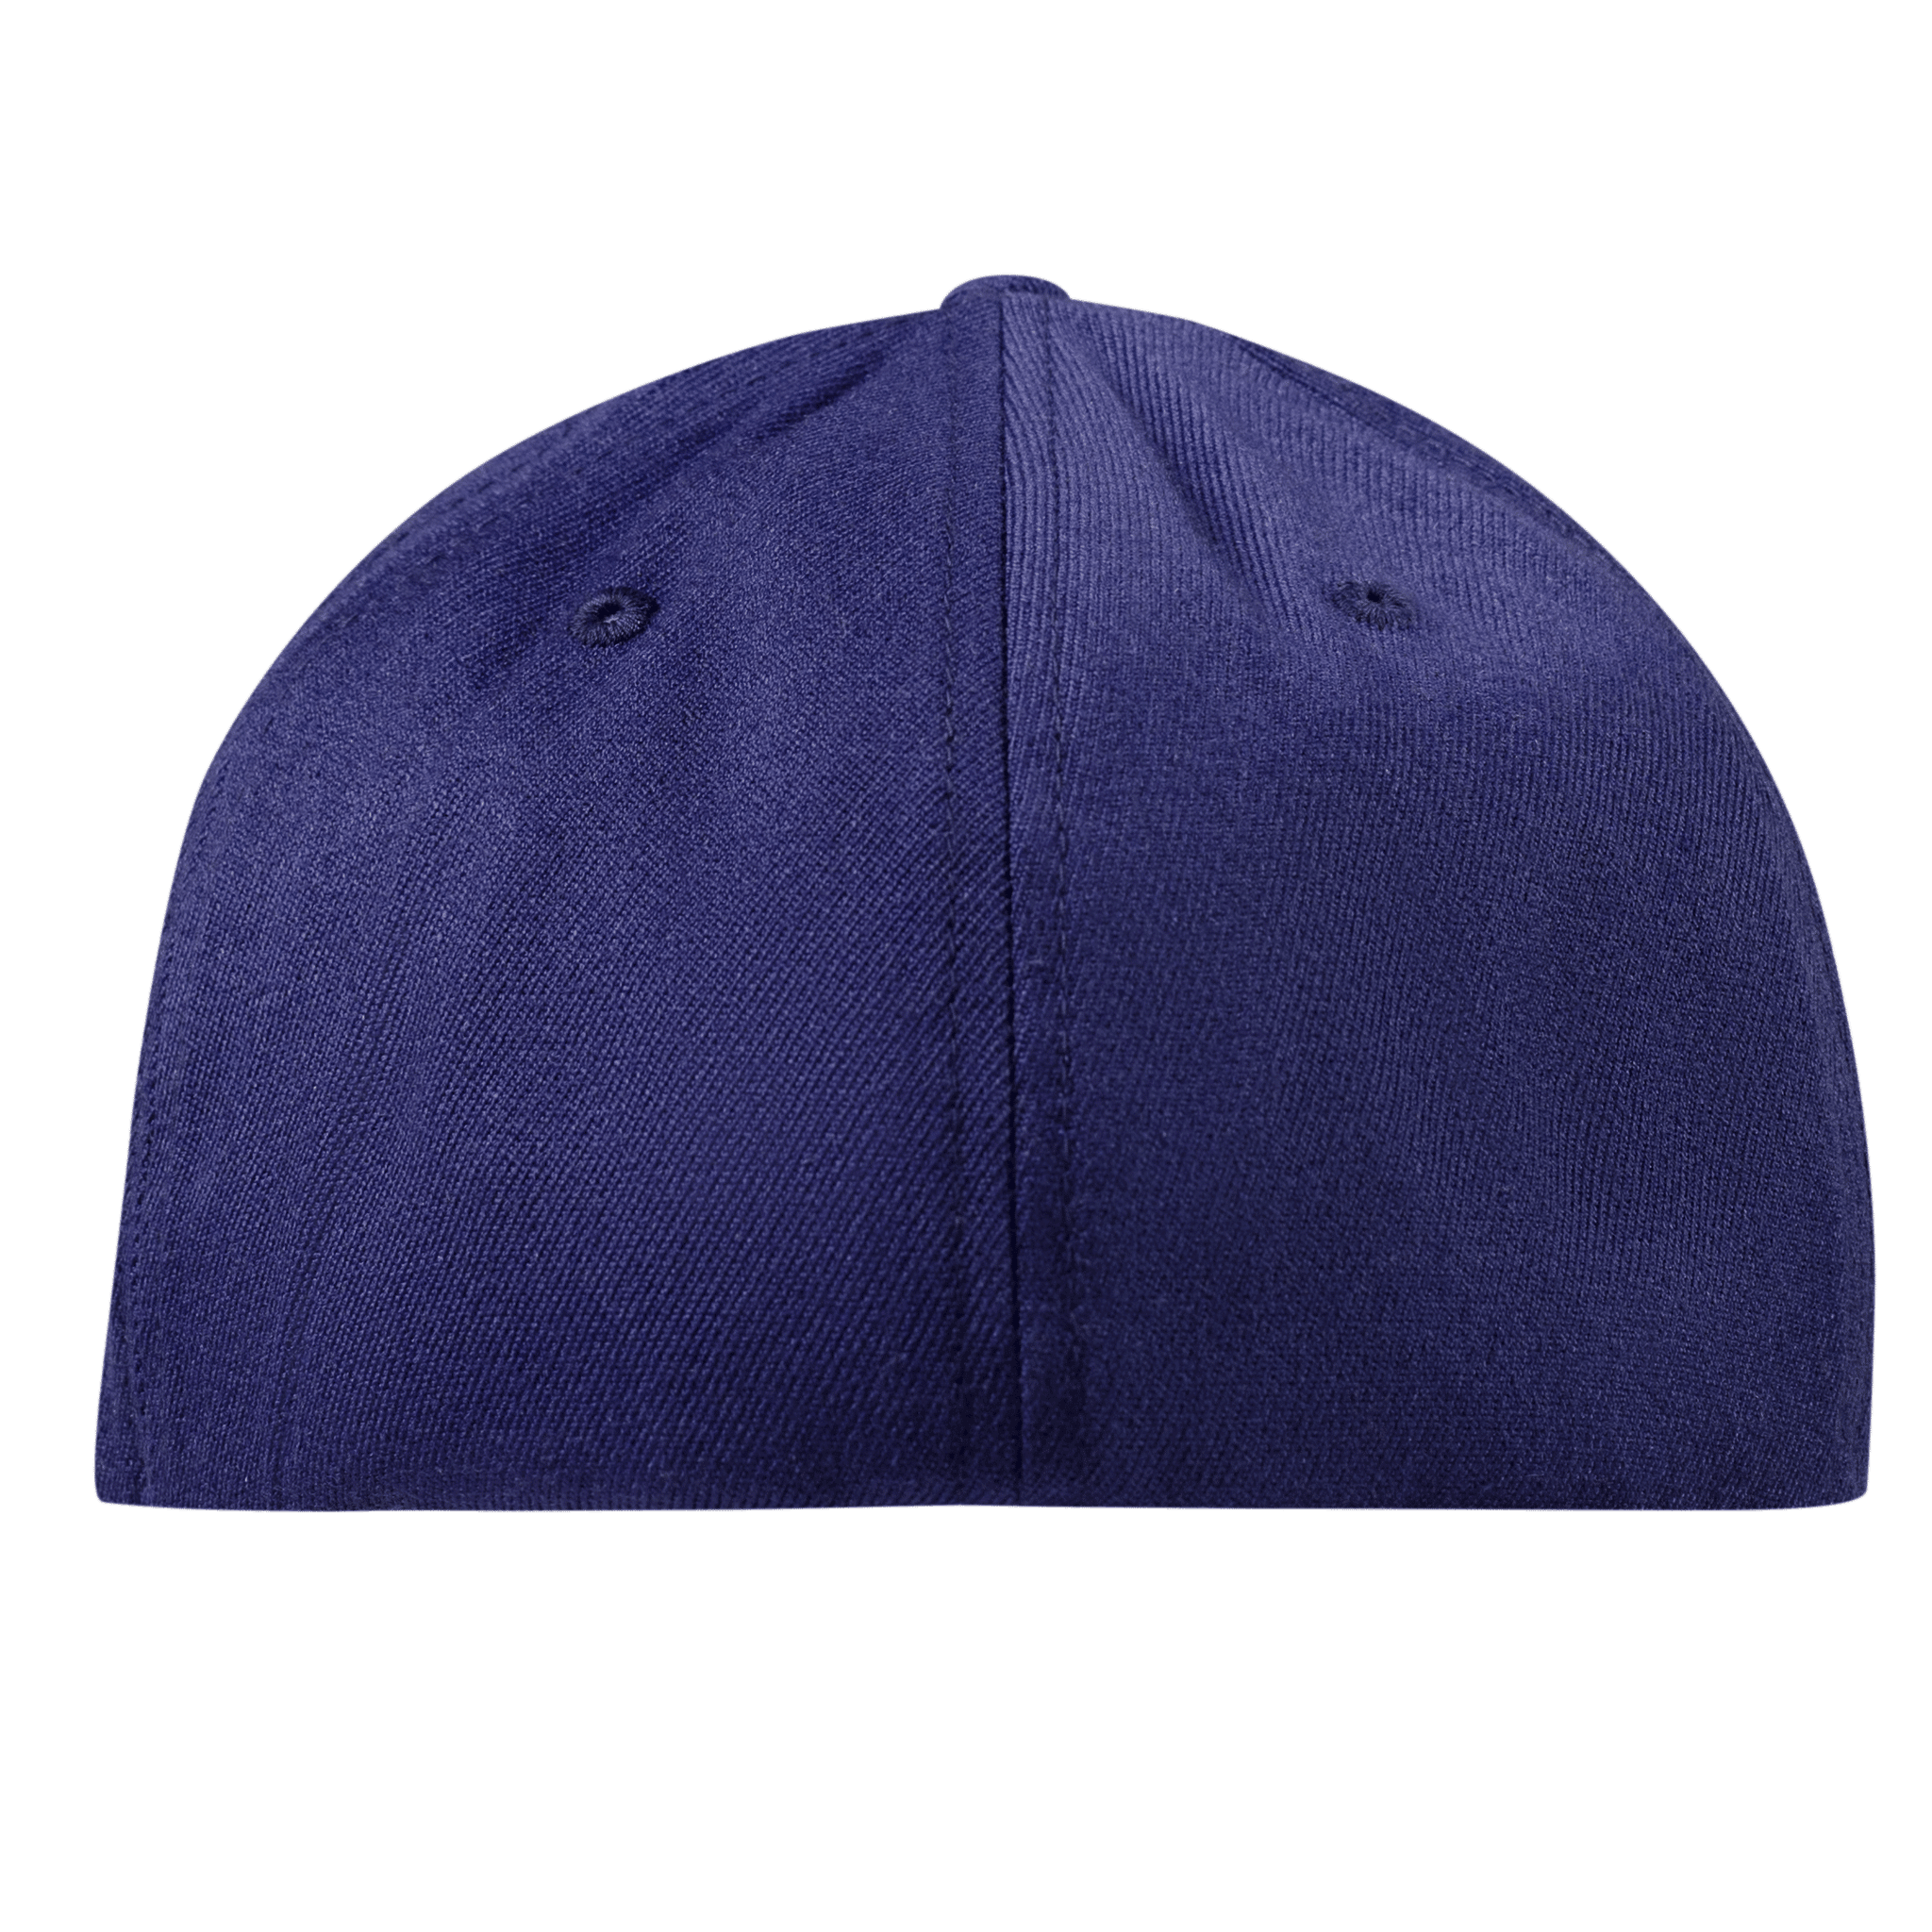 Wisconsin 30 PVC Flexfit Fitted Back Navy